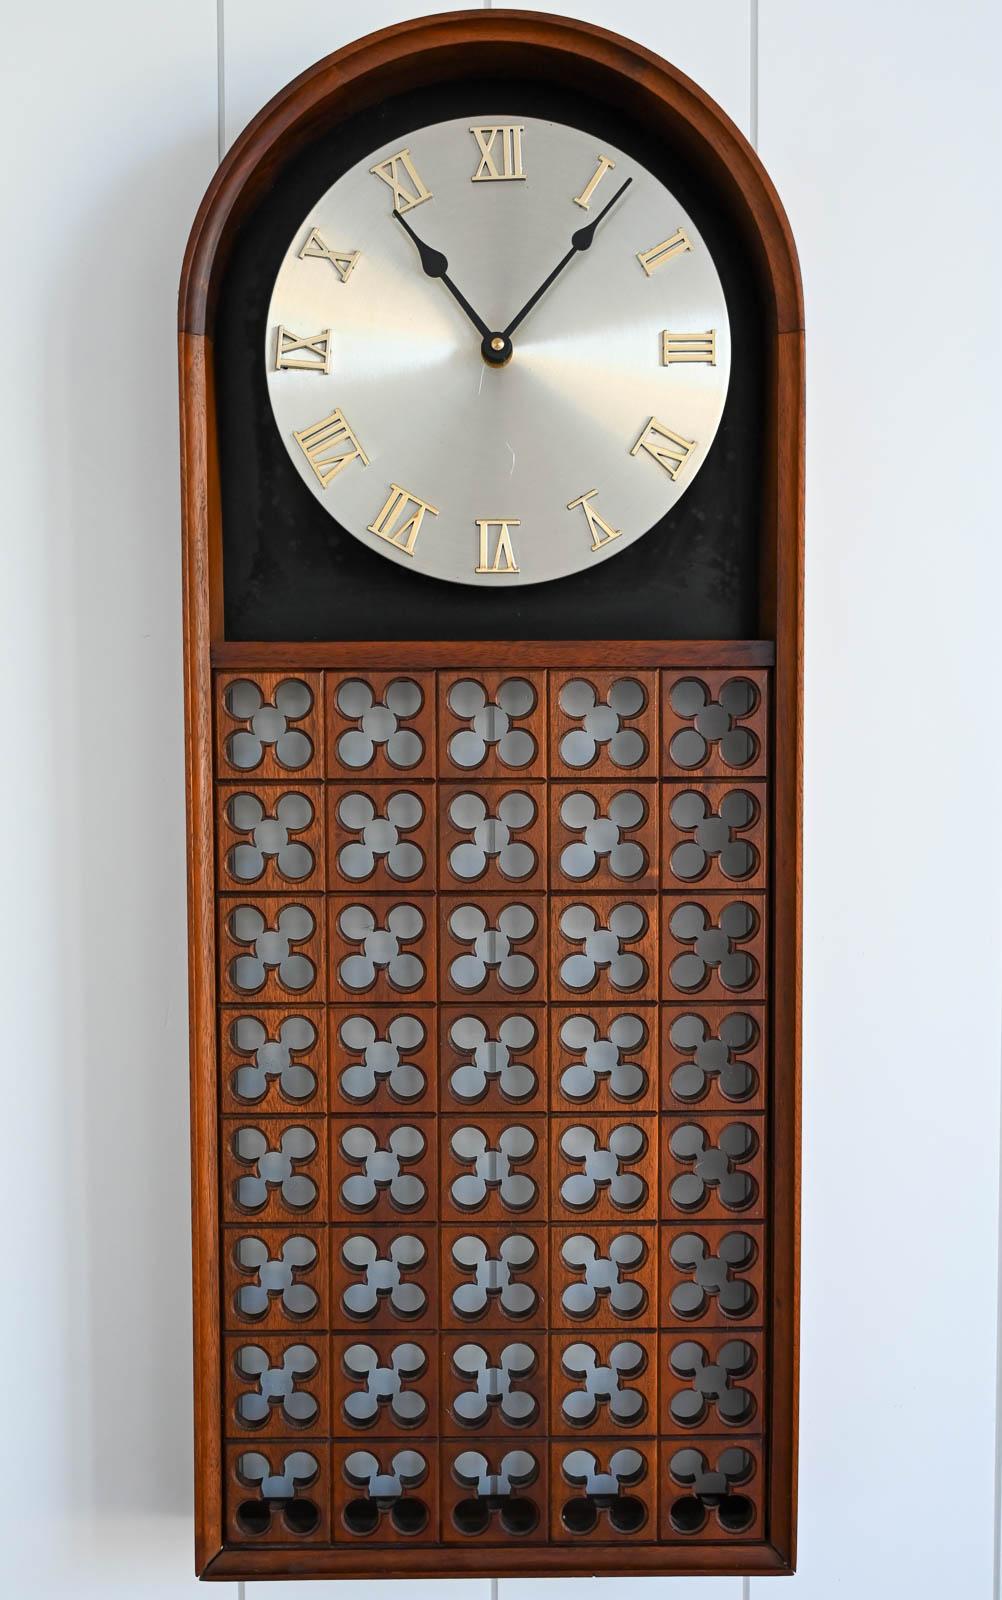 Walnut Wall Clock by Arthur Umanoff for Howard Miller, ca. 1970. Meridian Clocks design line. Designed by Arthur Umanoff Assoc. Walnut Case. Battery operated clock work. Metal clock face and hands. Excellent working condition.  George Nelson